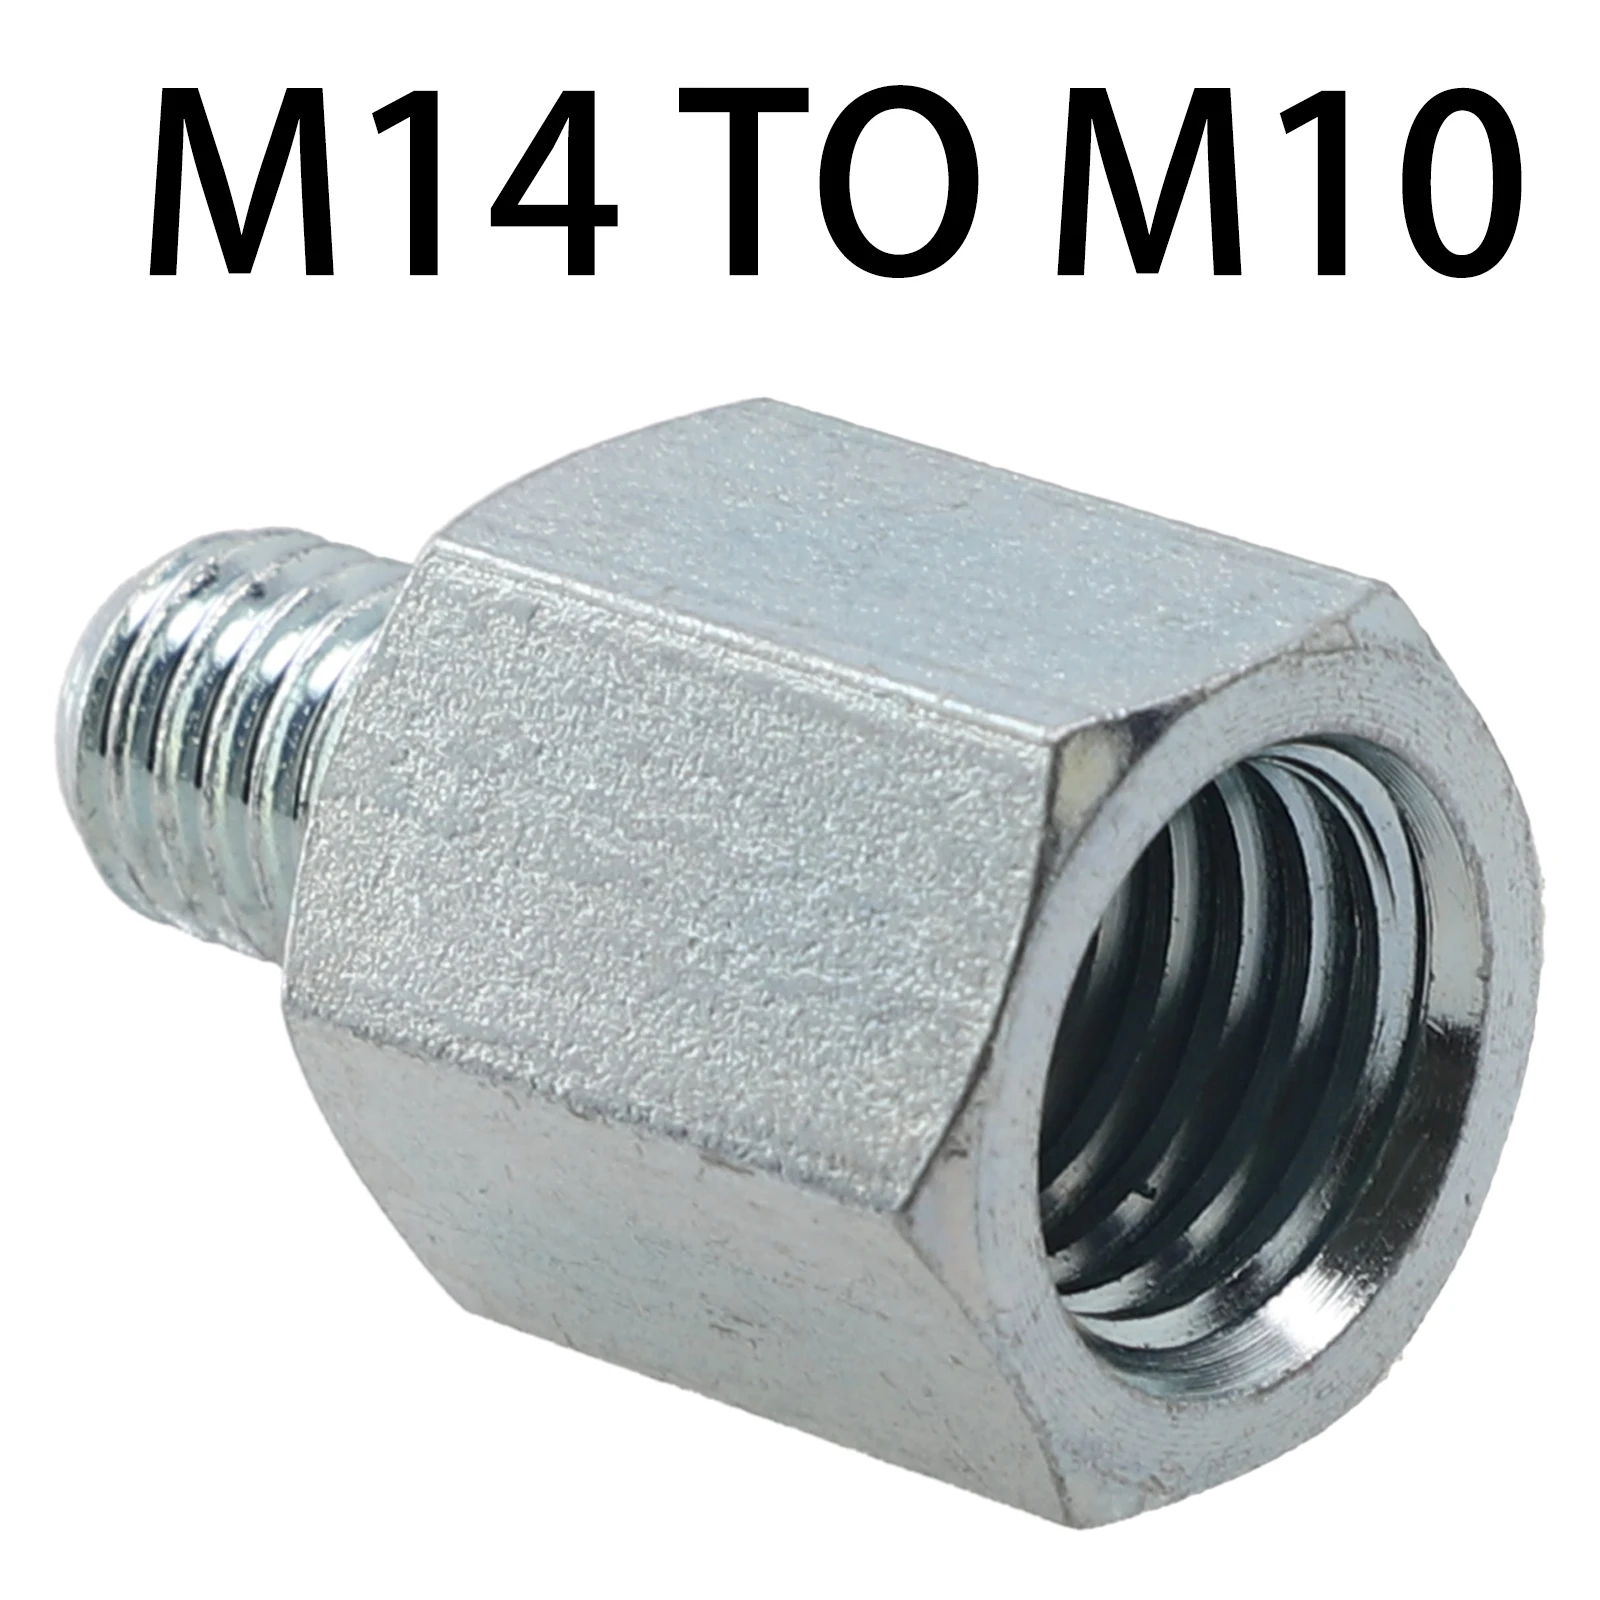 Angle Grinder Thread Adapter Connector Converter For Angle Grinder M10 To M14 M14 To M10 M14 To 5/8 -11 5/8 -11to M14 M16 To M14 dt diatool 1pc core bits extension rod convert m14 5 8 11 adapter connection converter for drilling bit change thread converter